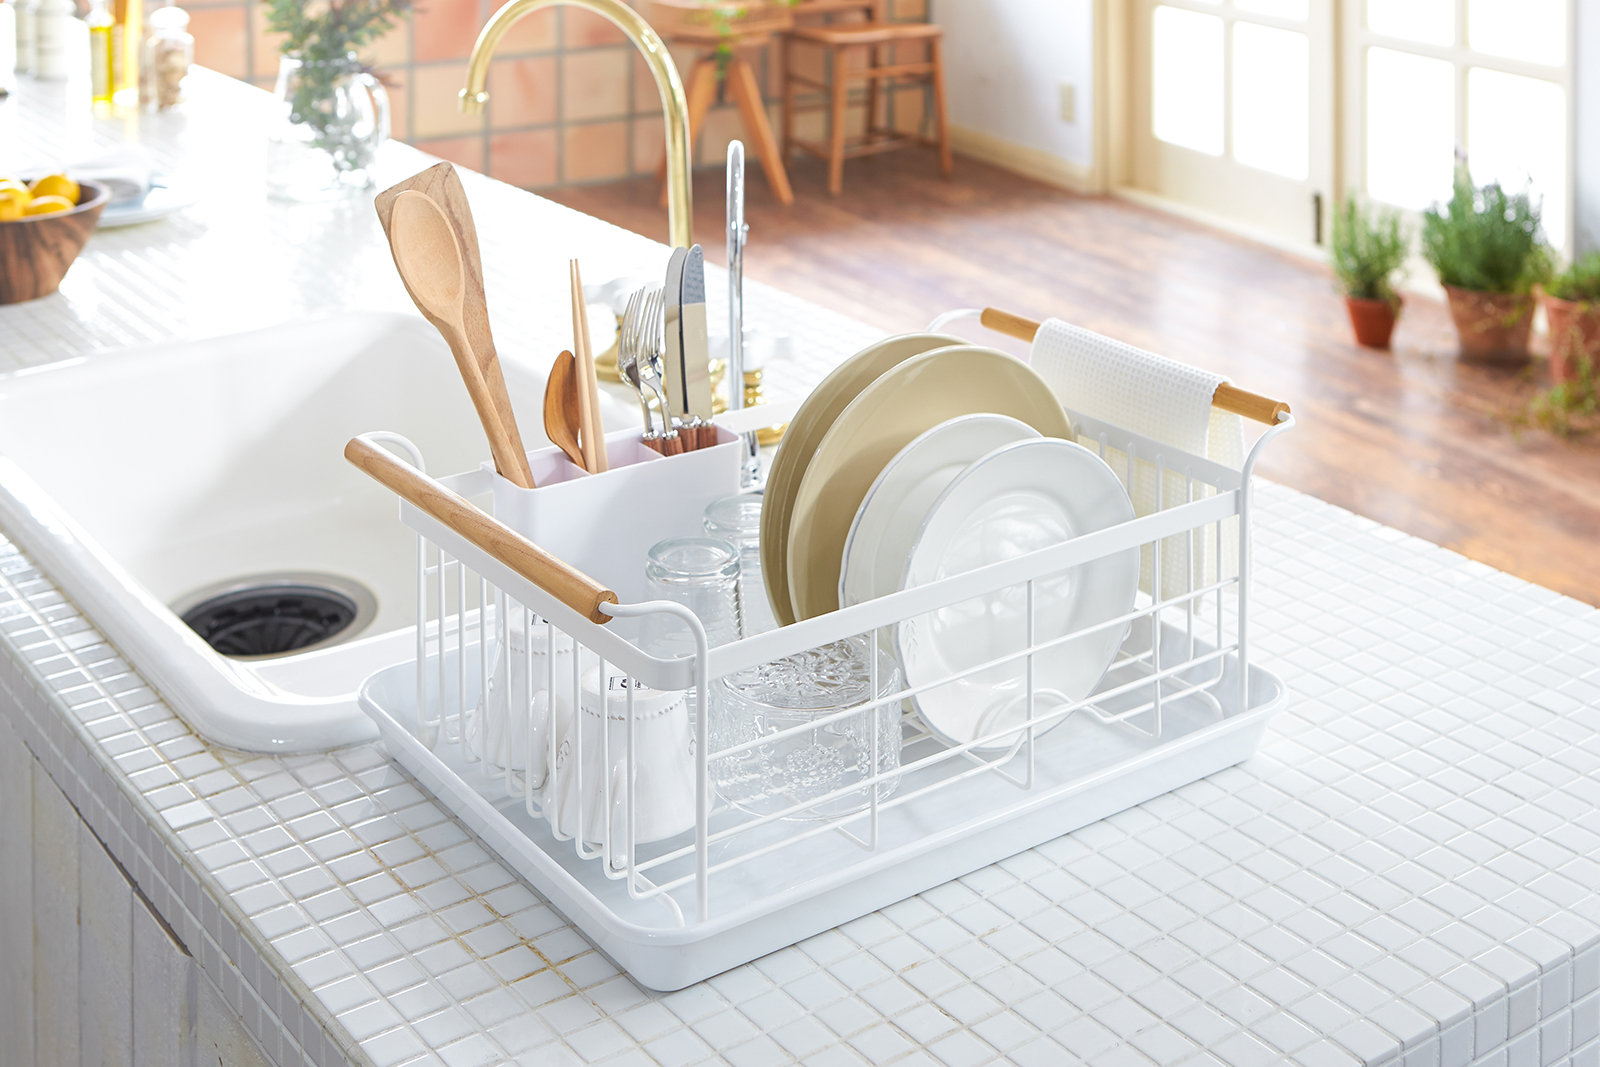 Yamazaki Home Tosca Dish Rack holding plates and utensils on a kitchen counter. 